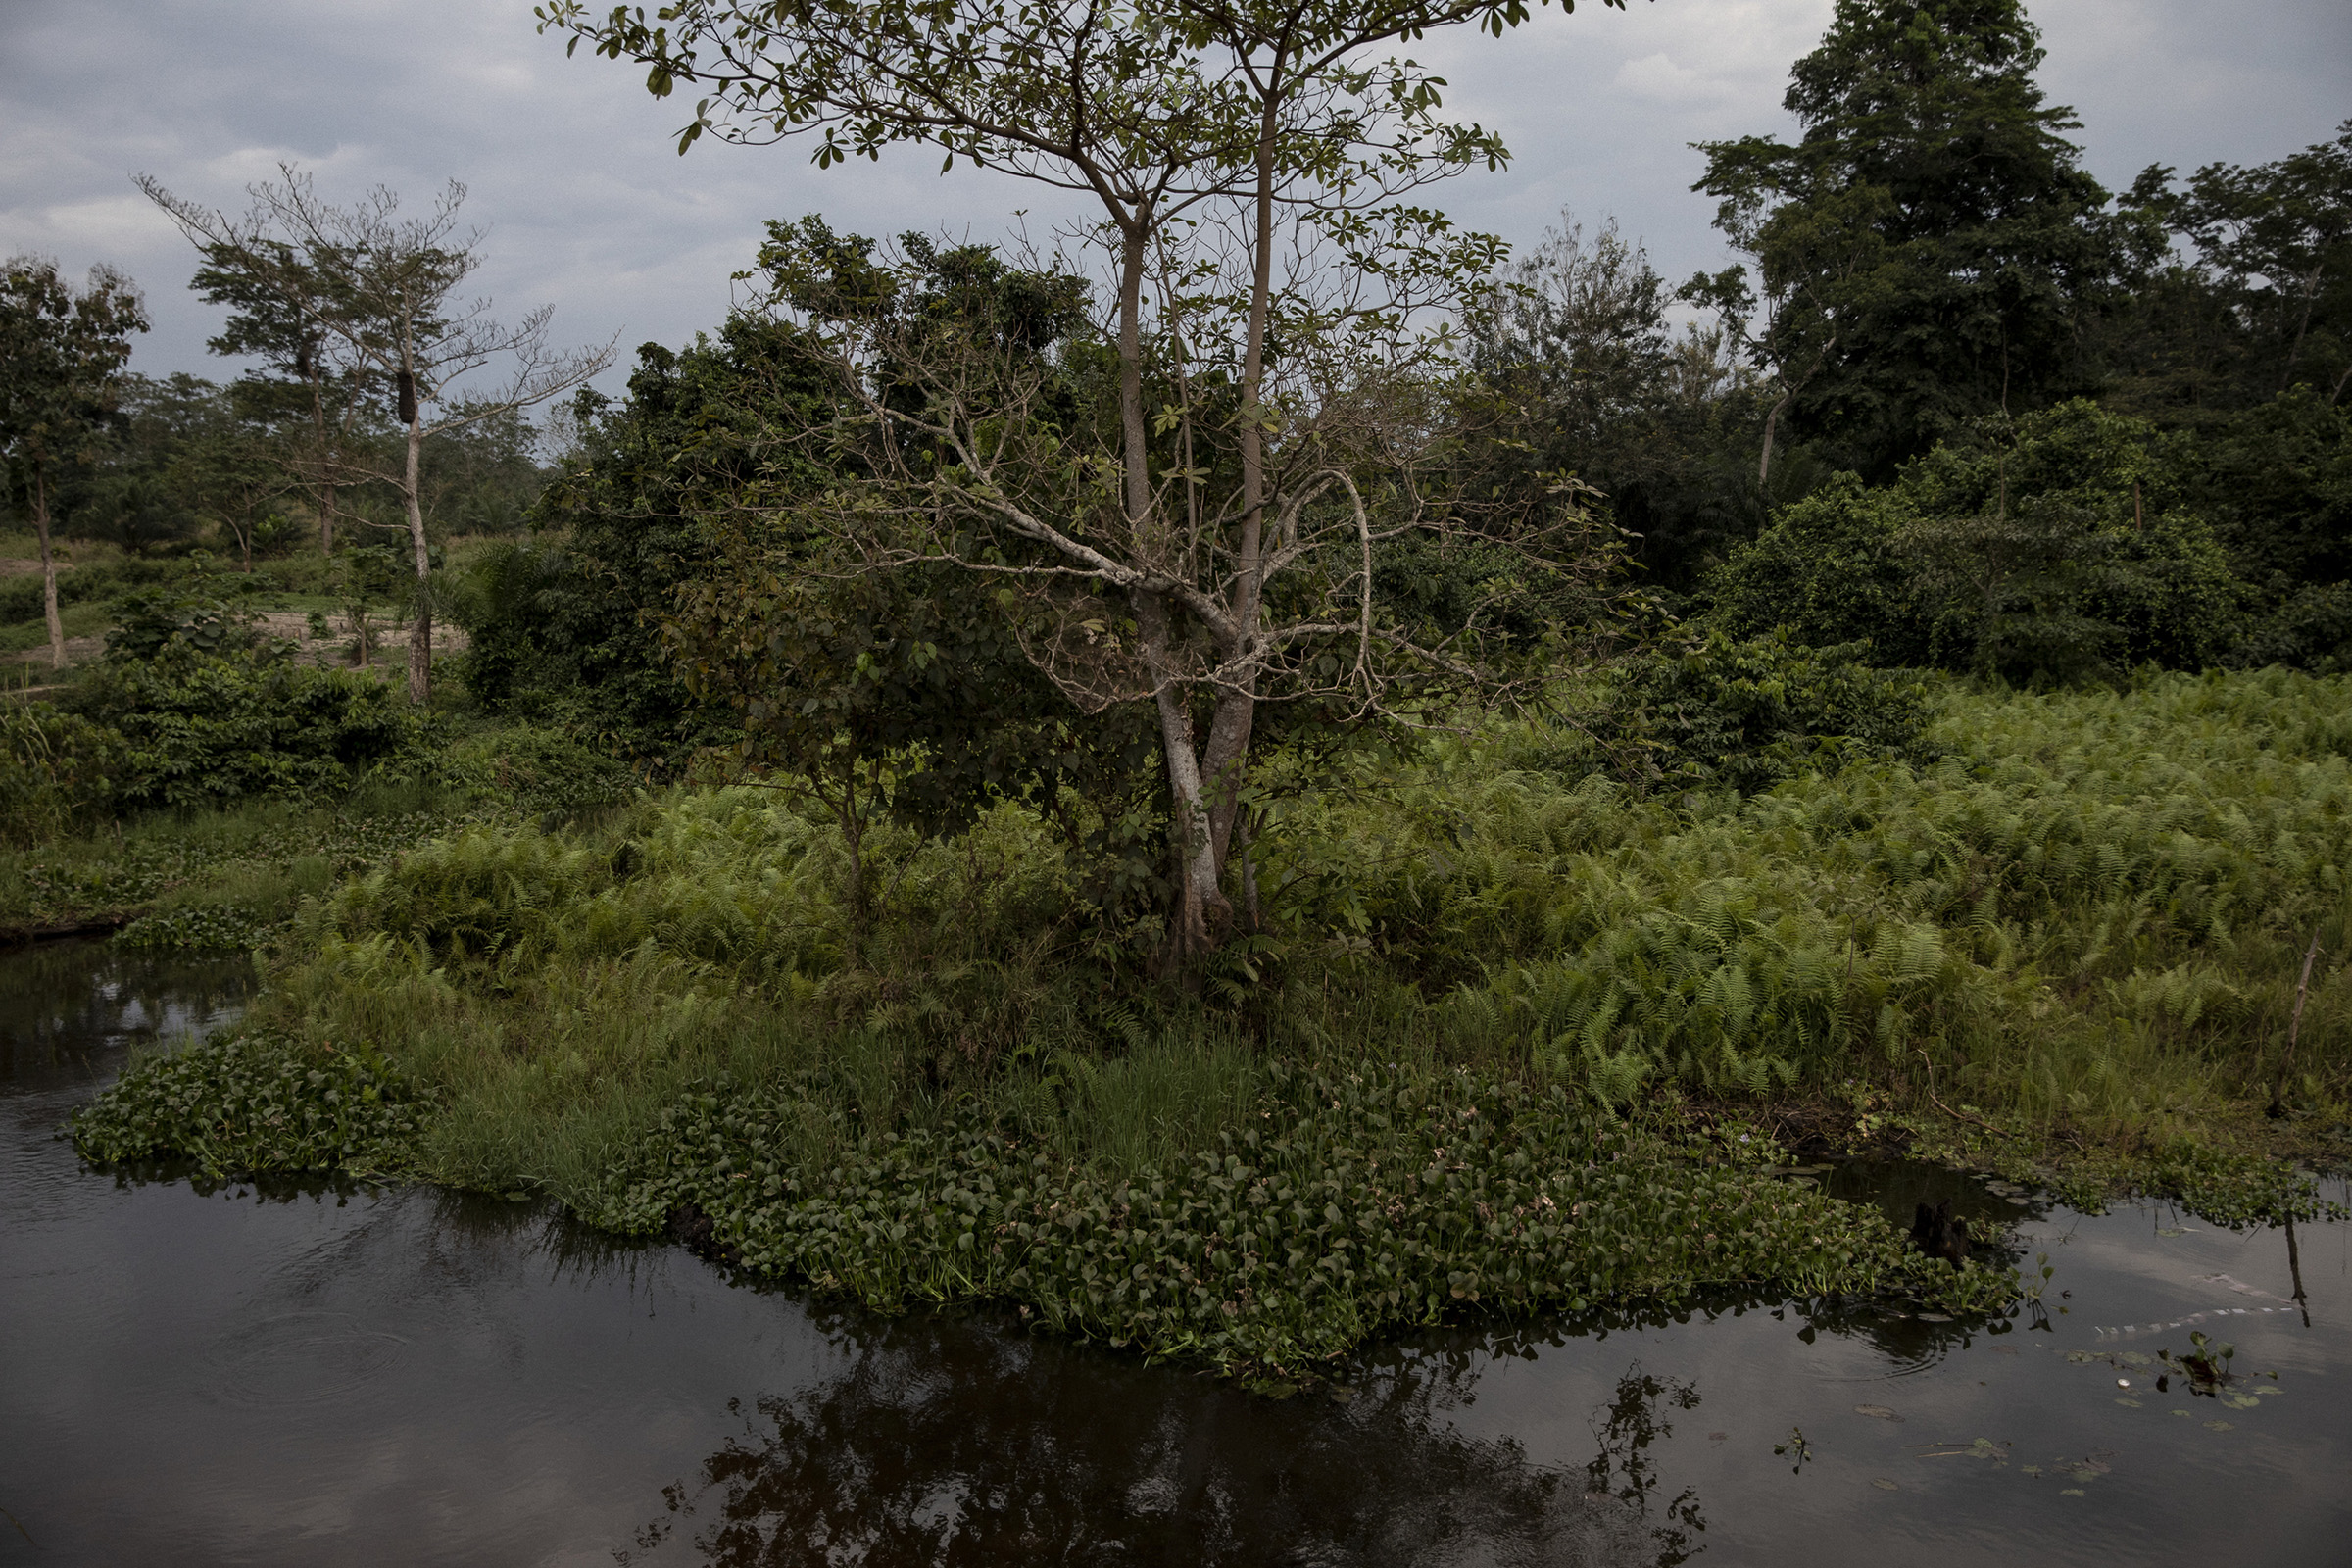 Bruno Yamkomopanza, a farmer in Bimbo near Bangui, lost his five hectares of sowing seeds to the floods, seen here on Nov. 24, 2019. (Adrienne Surprenant—Greenpeace)